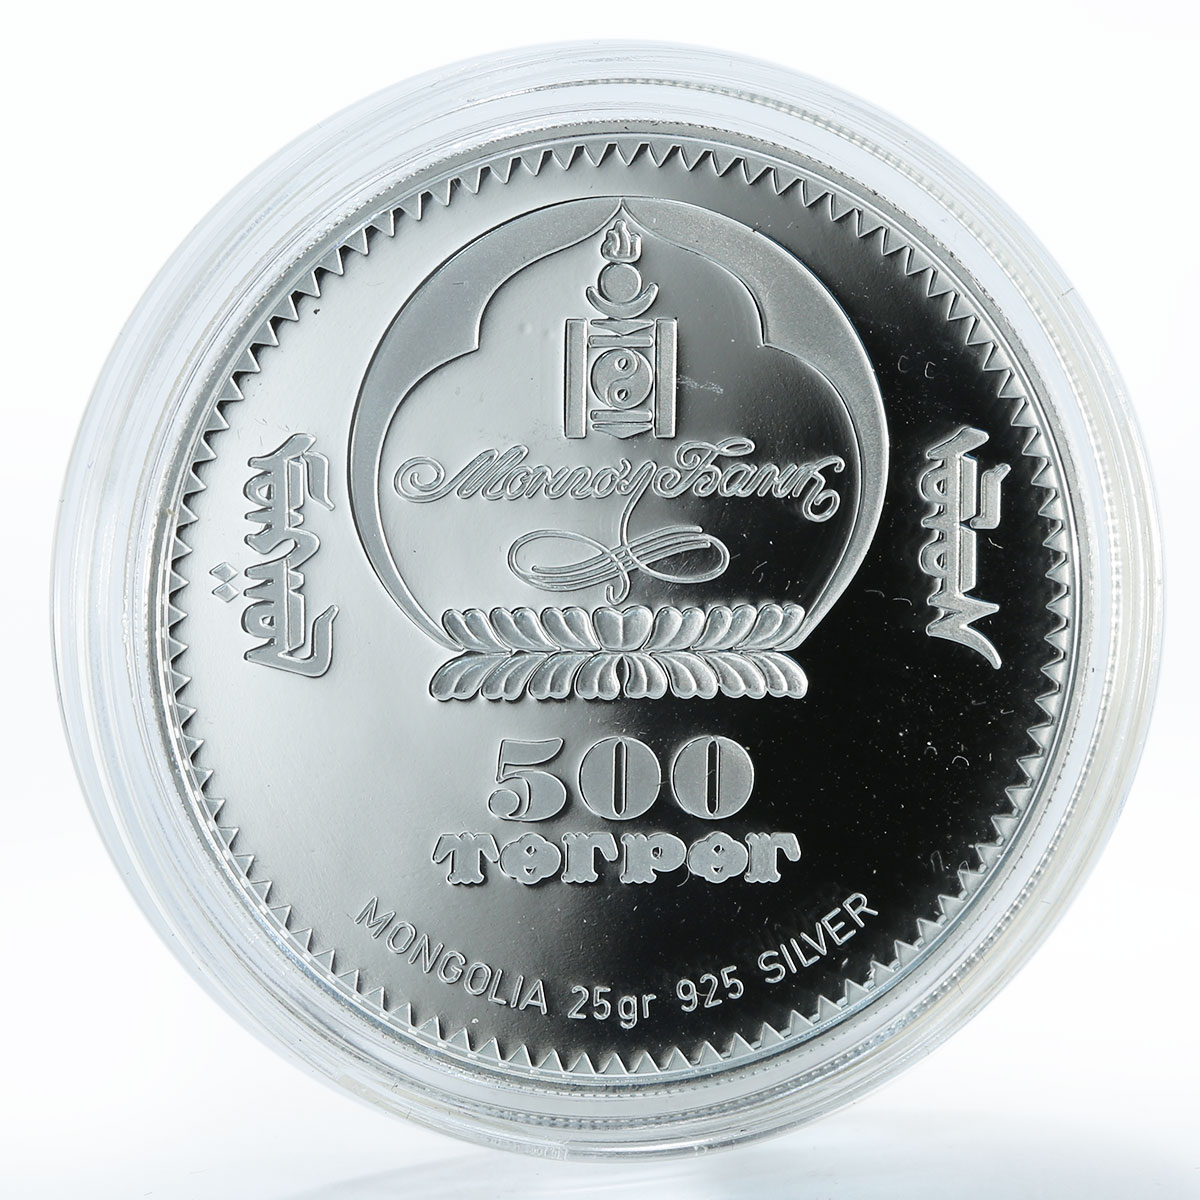 Mongolia 500 tugriks Great Wall of China 7 Wonders silver coloured coin 2008